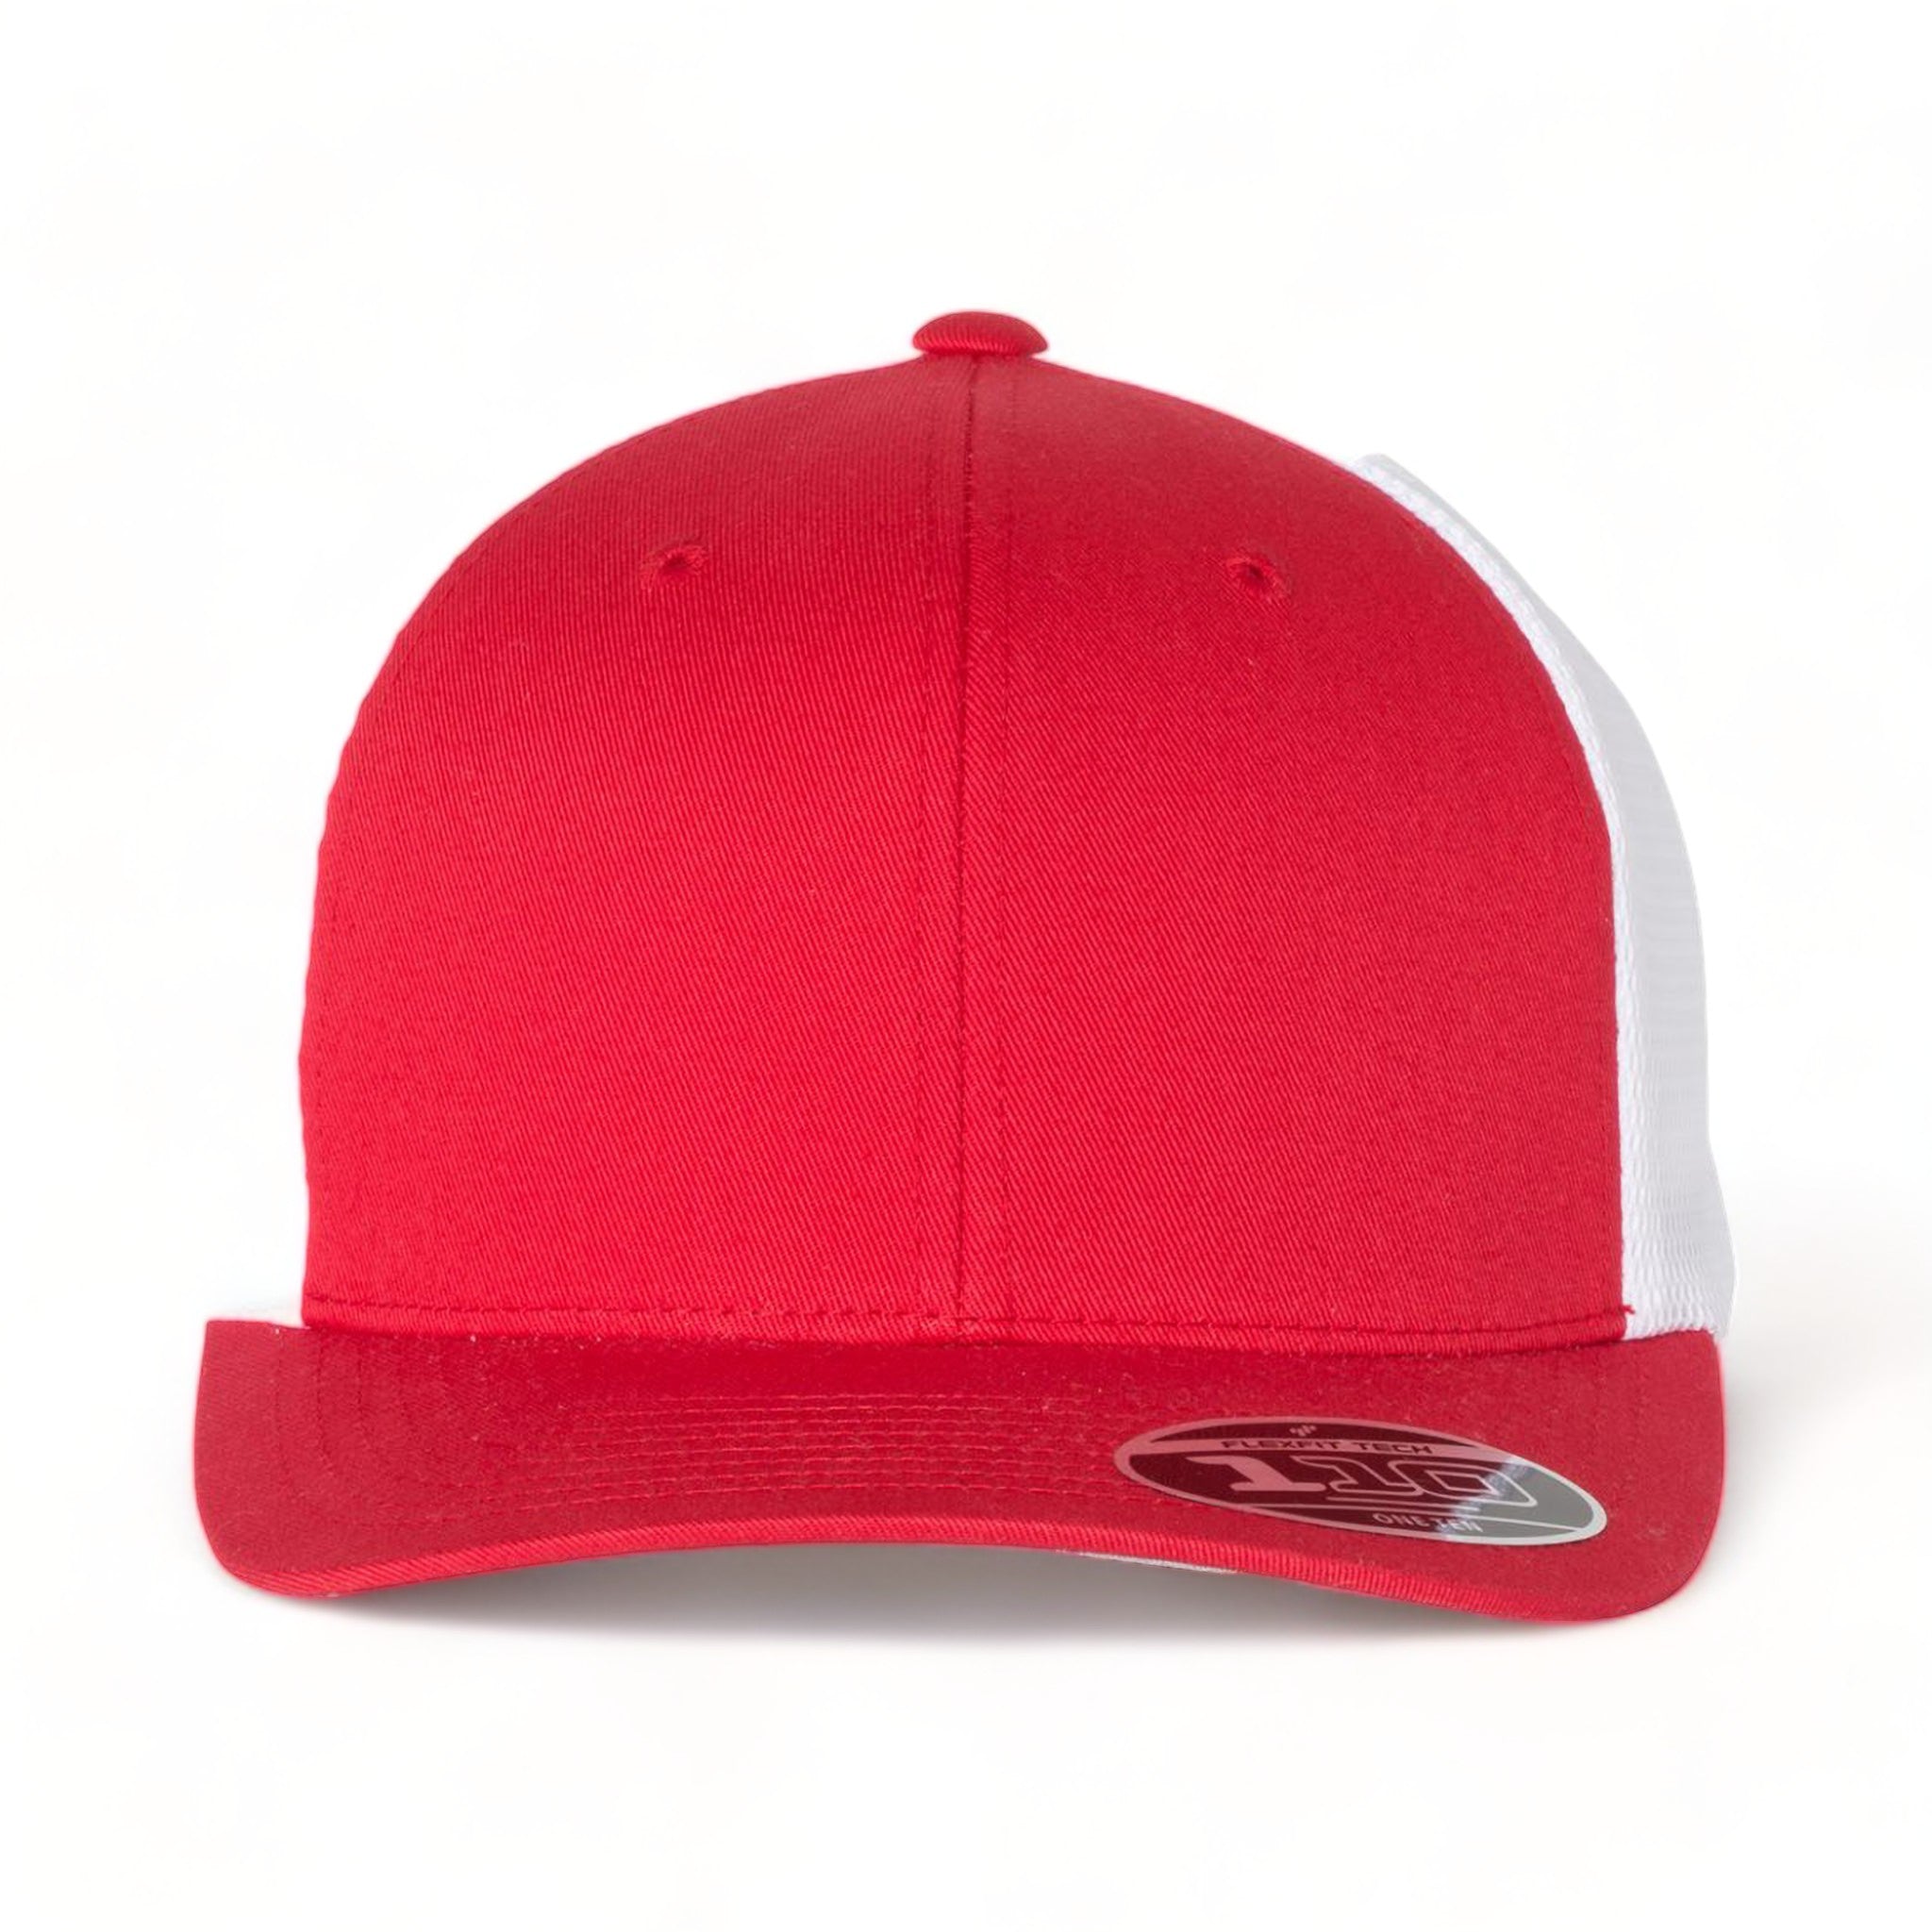 Front view of Flexfit 110M custom hat in red and white